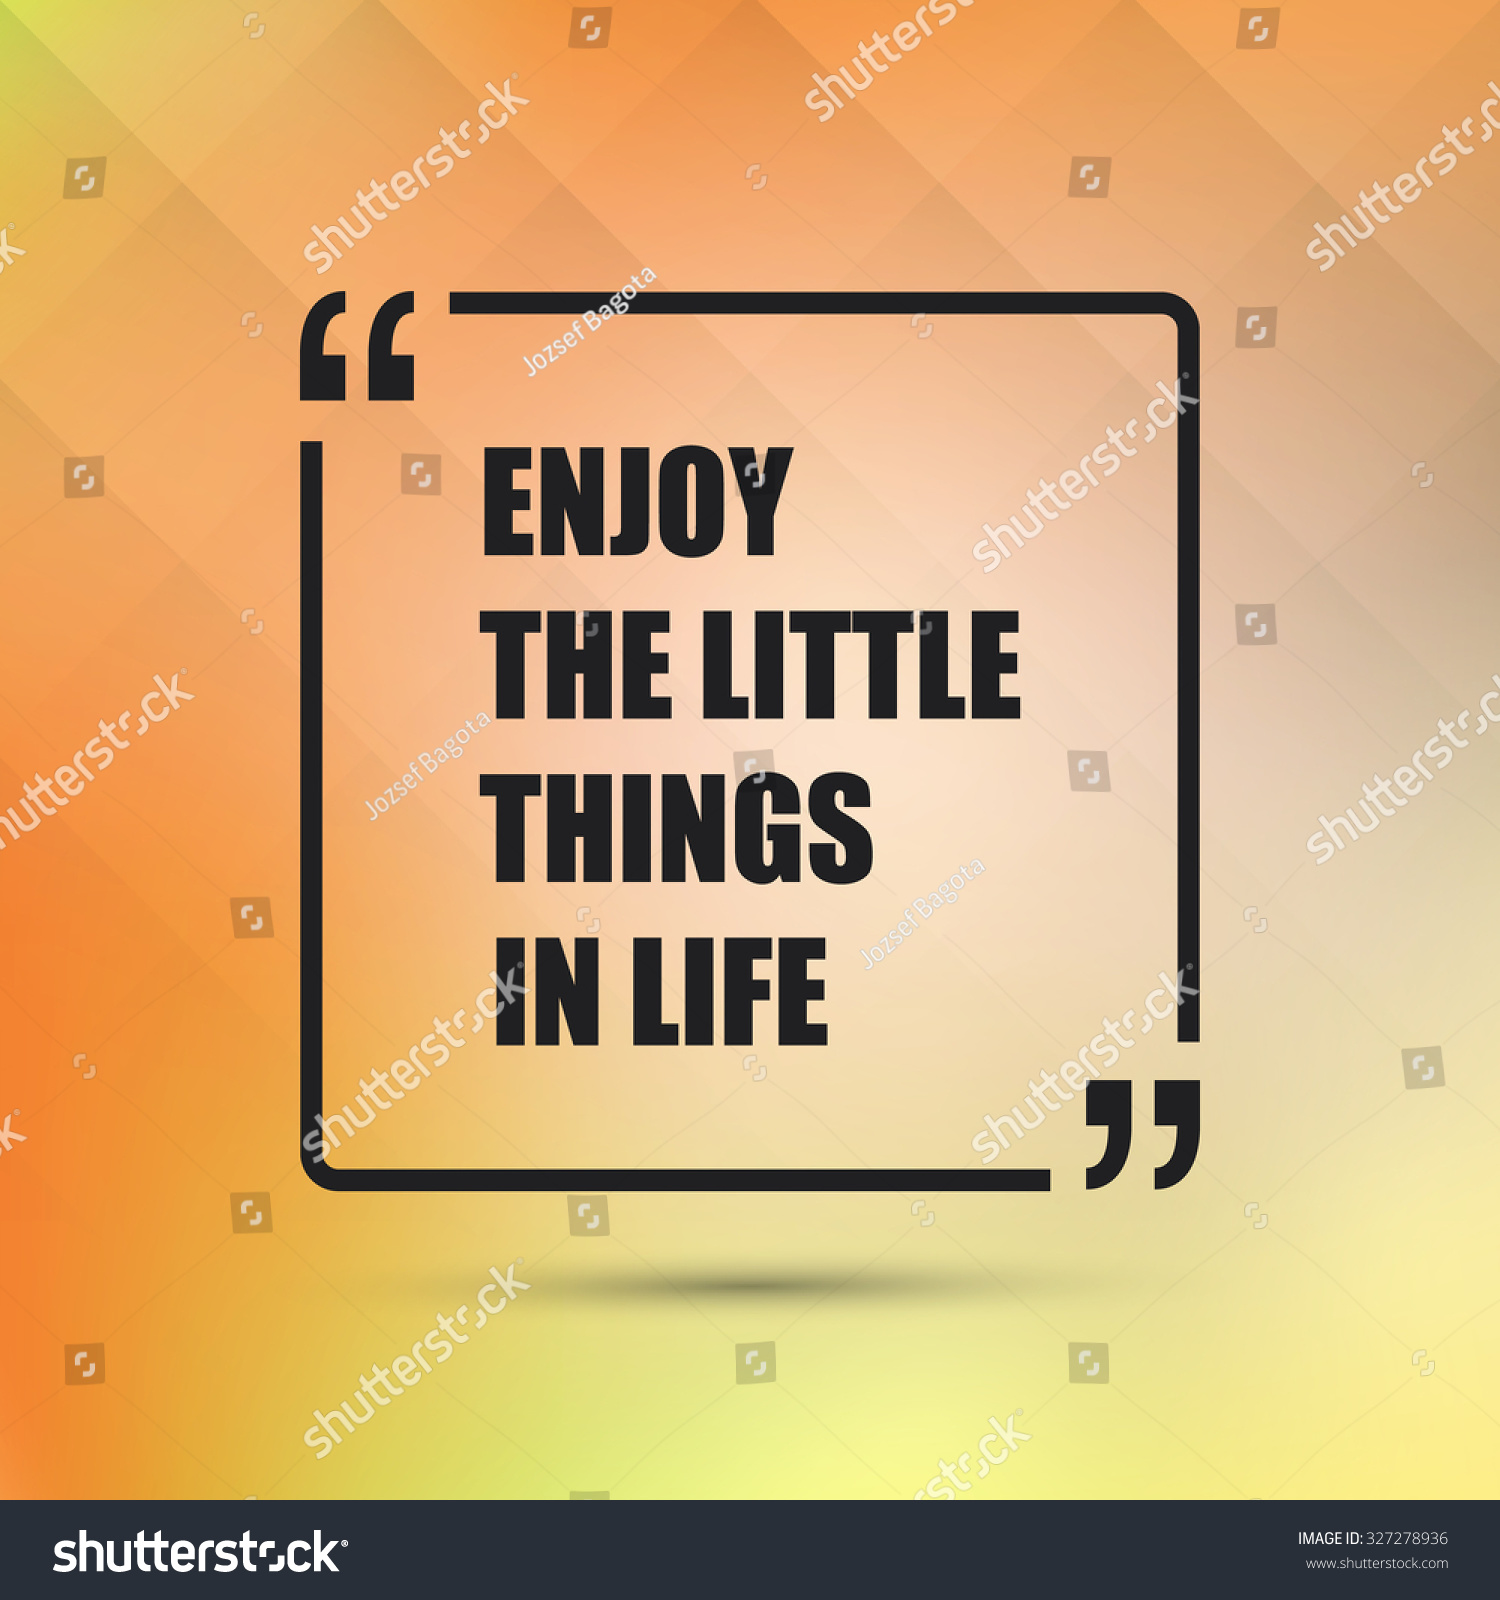 Enjoy the Little Things in Life Inspirational Quote Slogan Saying an Abstract